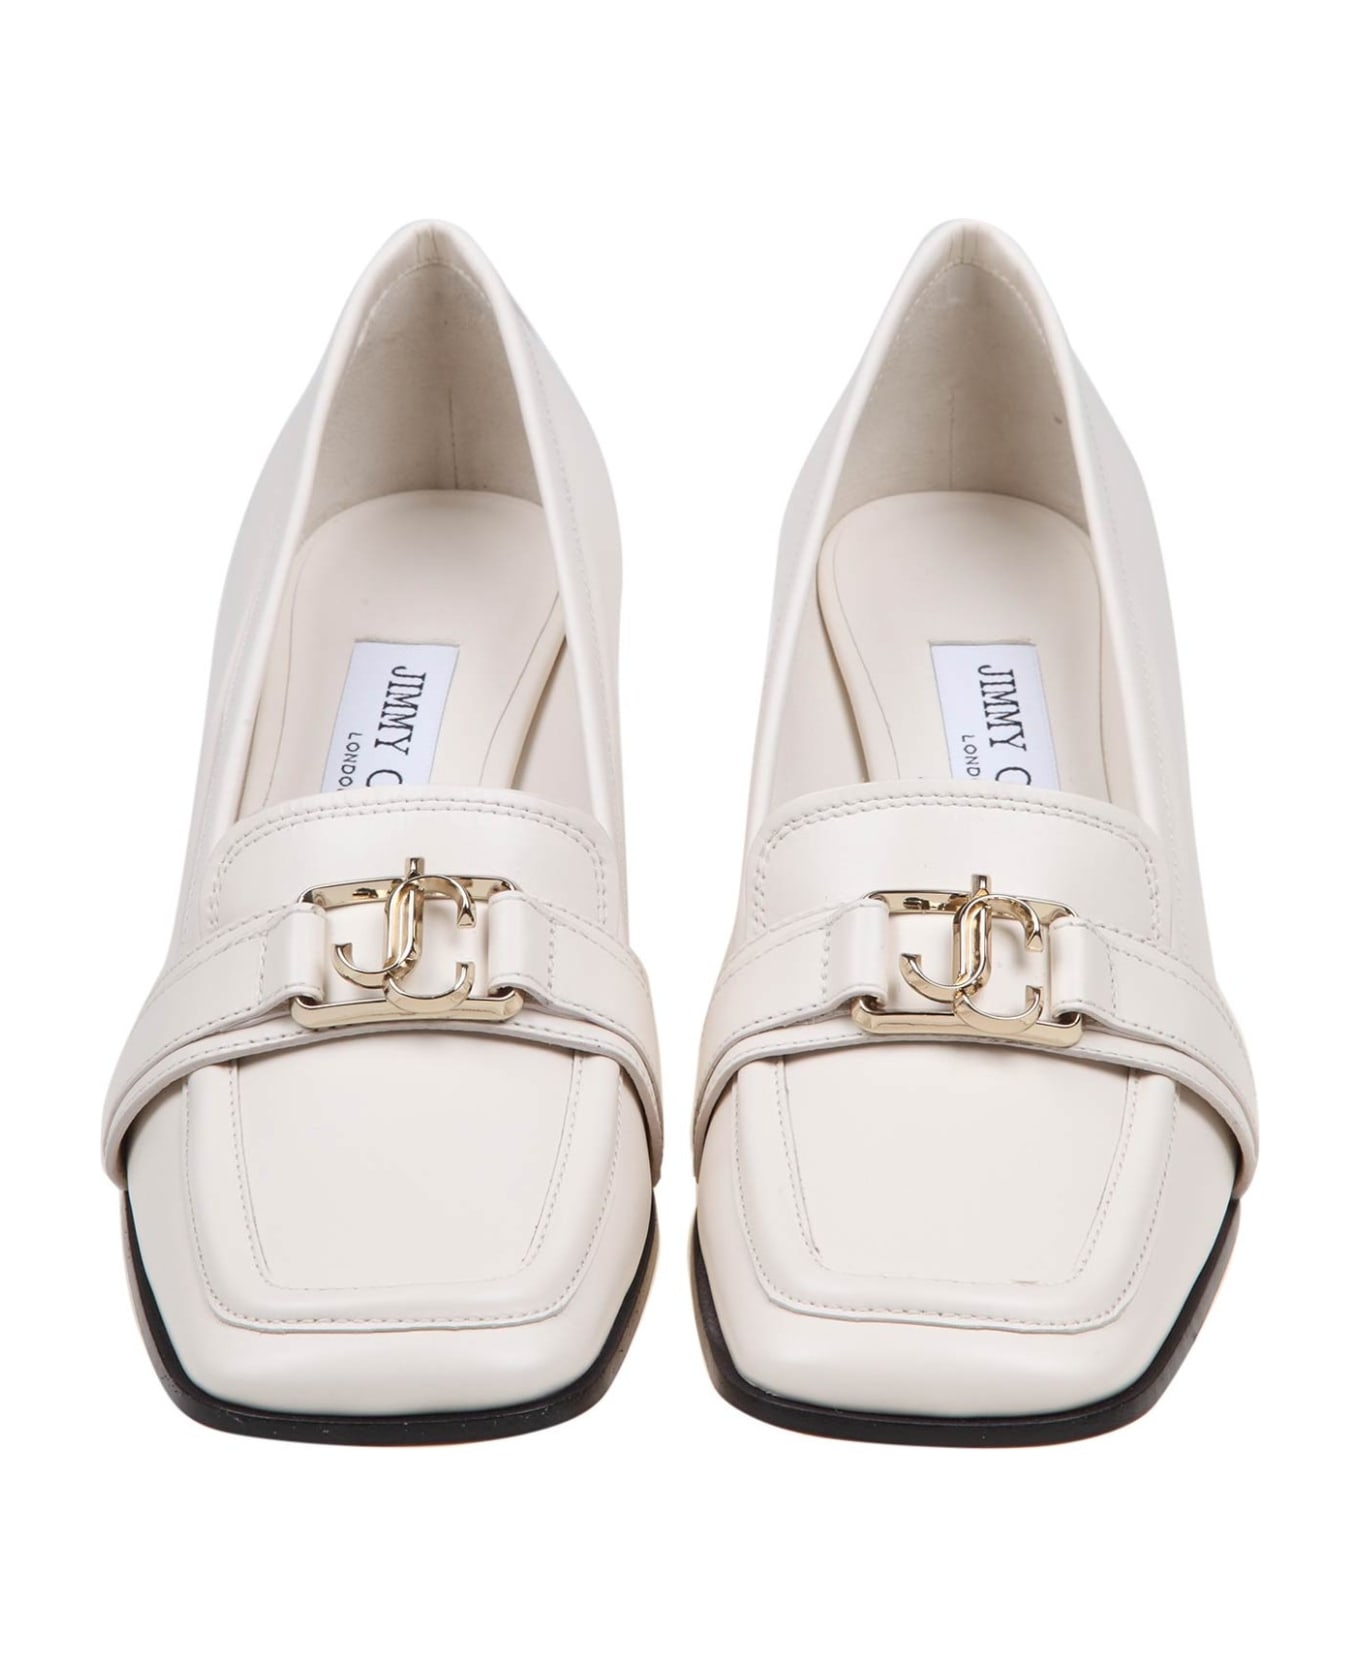 Jimmy Choo Loafers With Heel In Milk Color Leather - Latte/gold ハイヒール